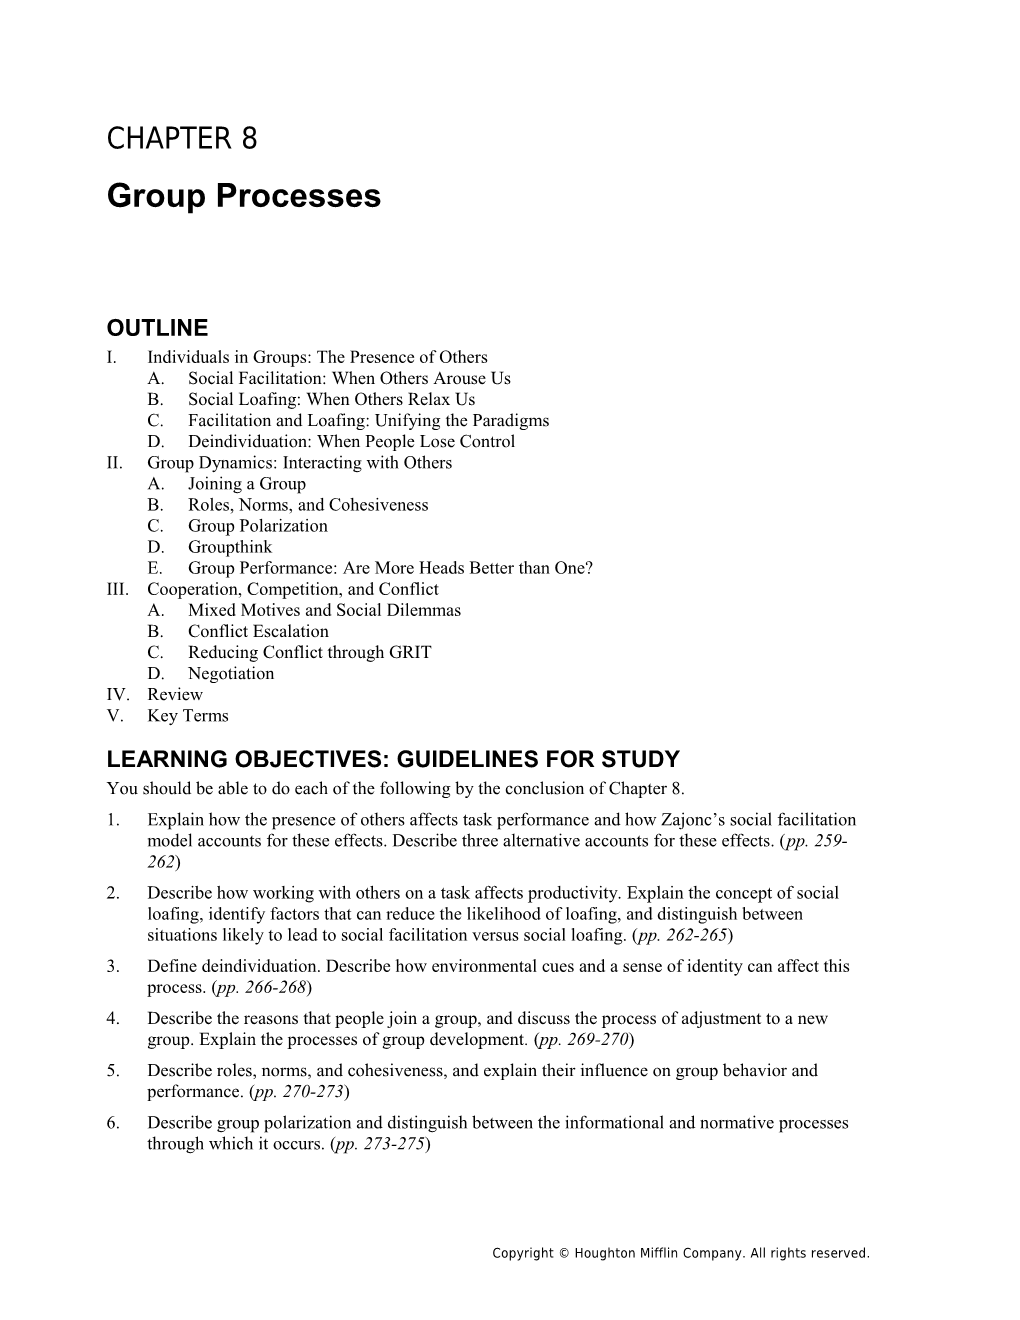 Chapter 8: Group Processes 1